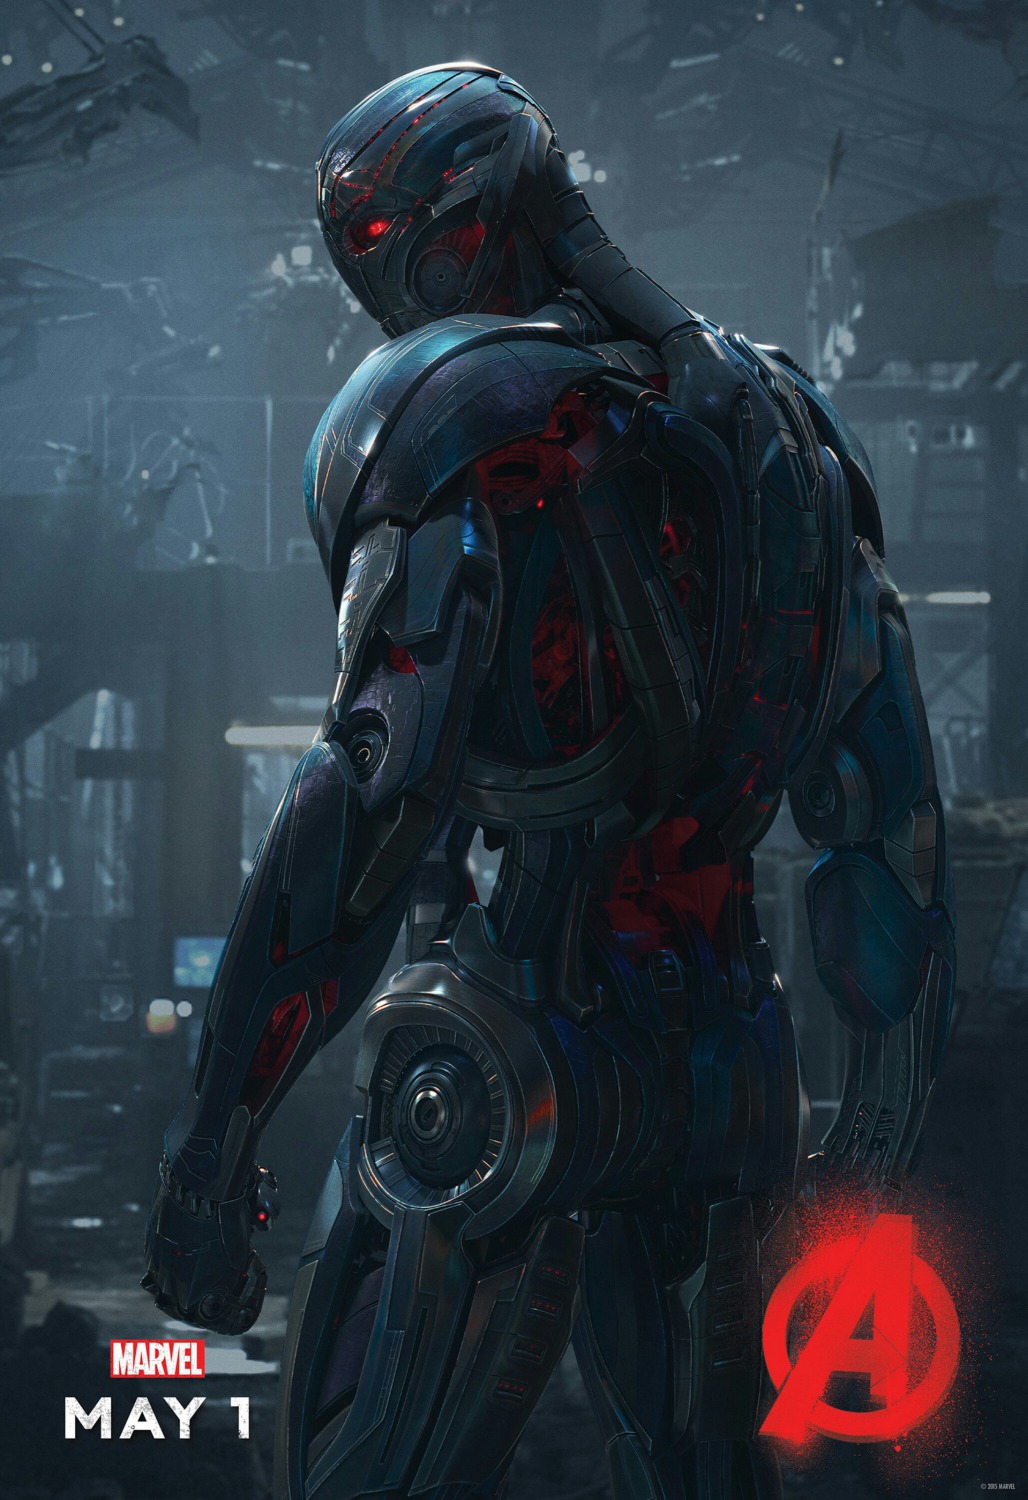 Extra Large Movie Poster Image for Avengers: Age of Ultron (#22 of 36)